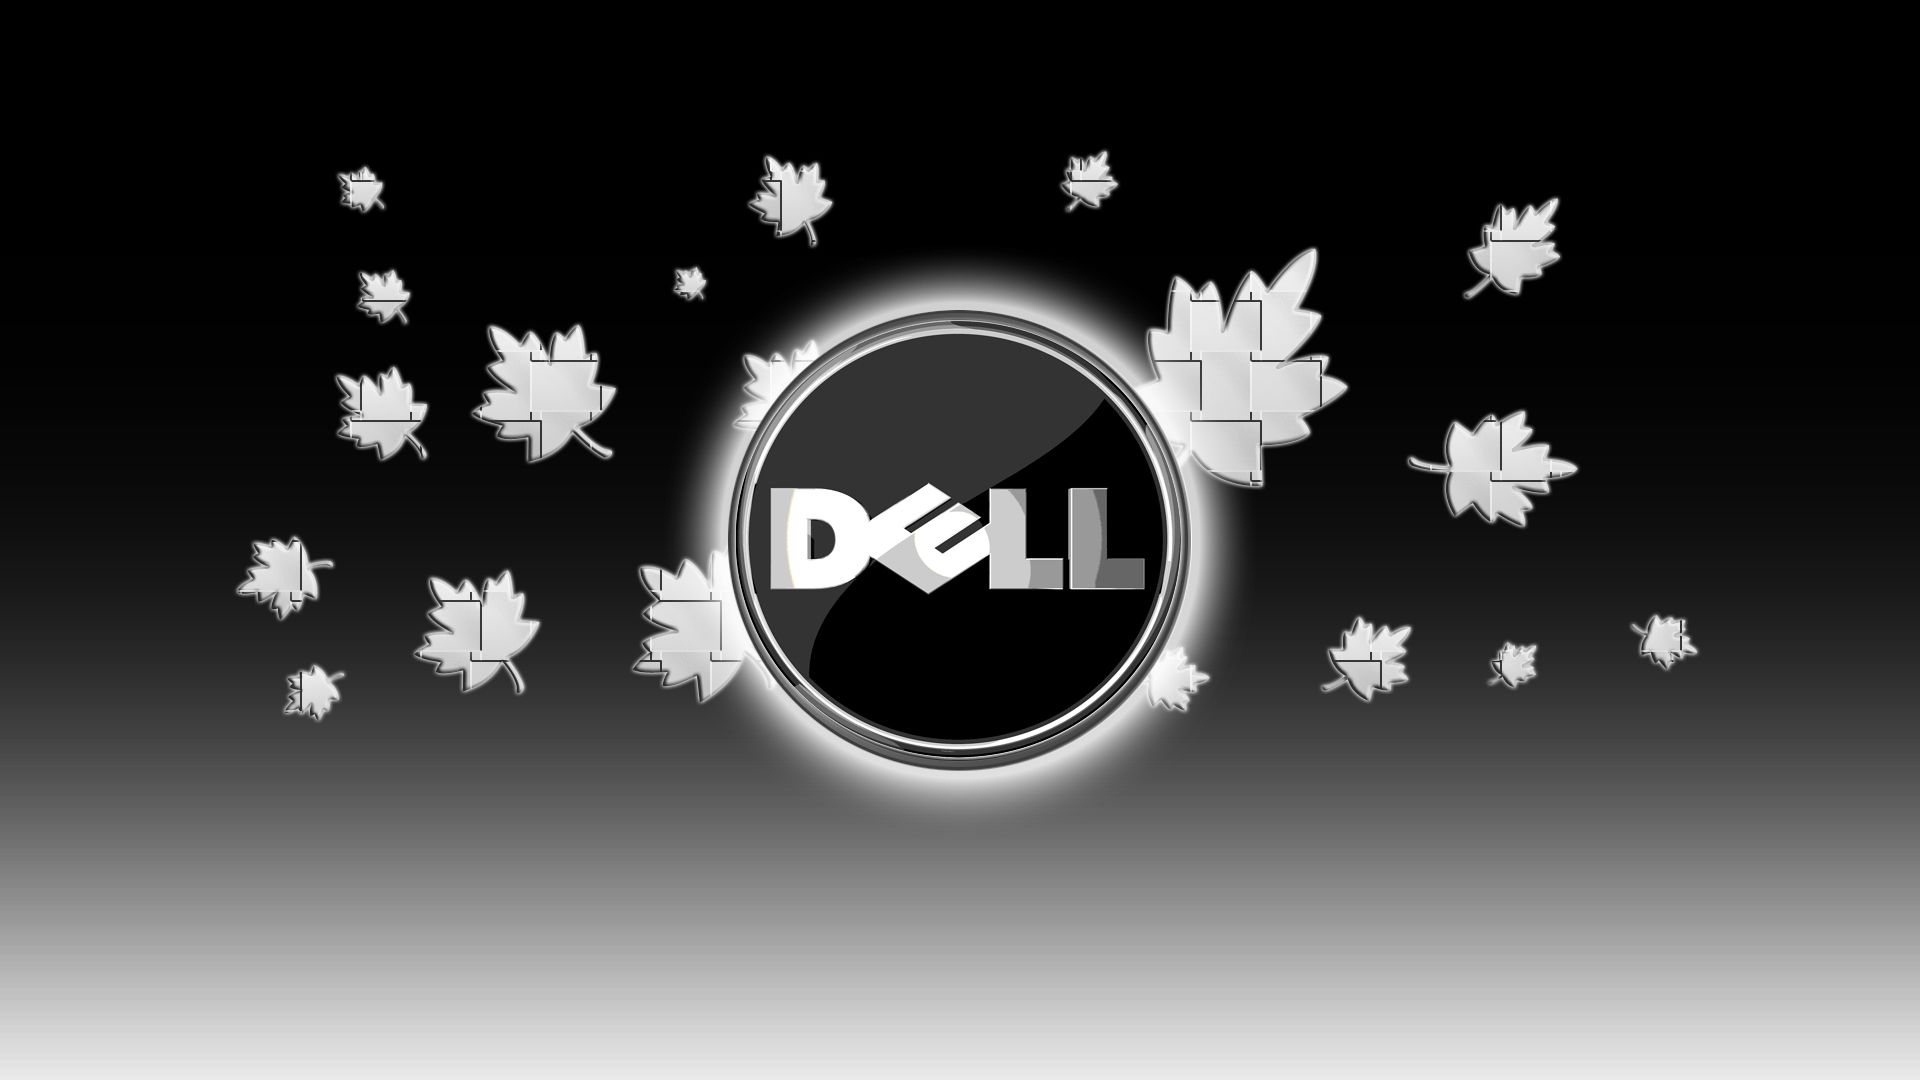 HD Dell Wallpapers Full HD Pictures